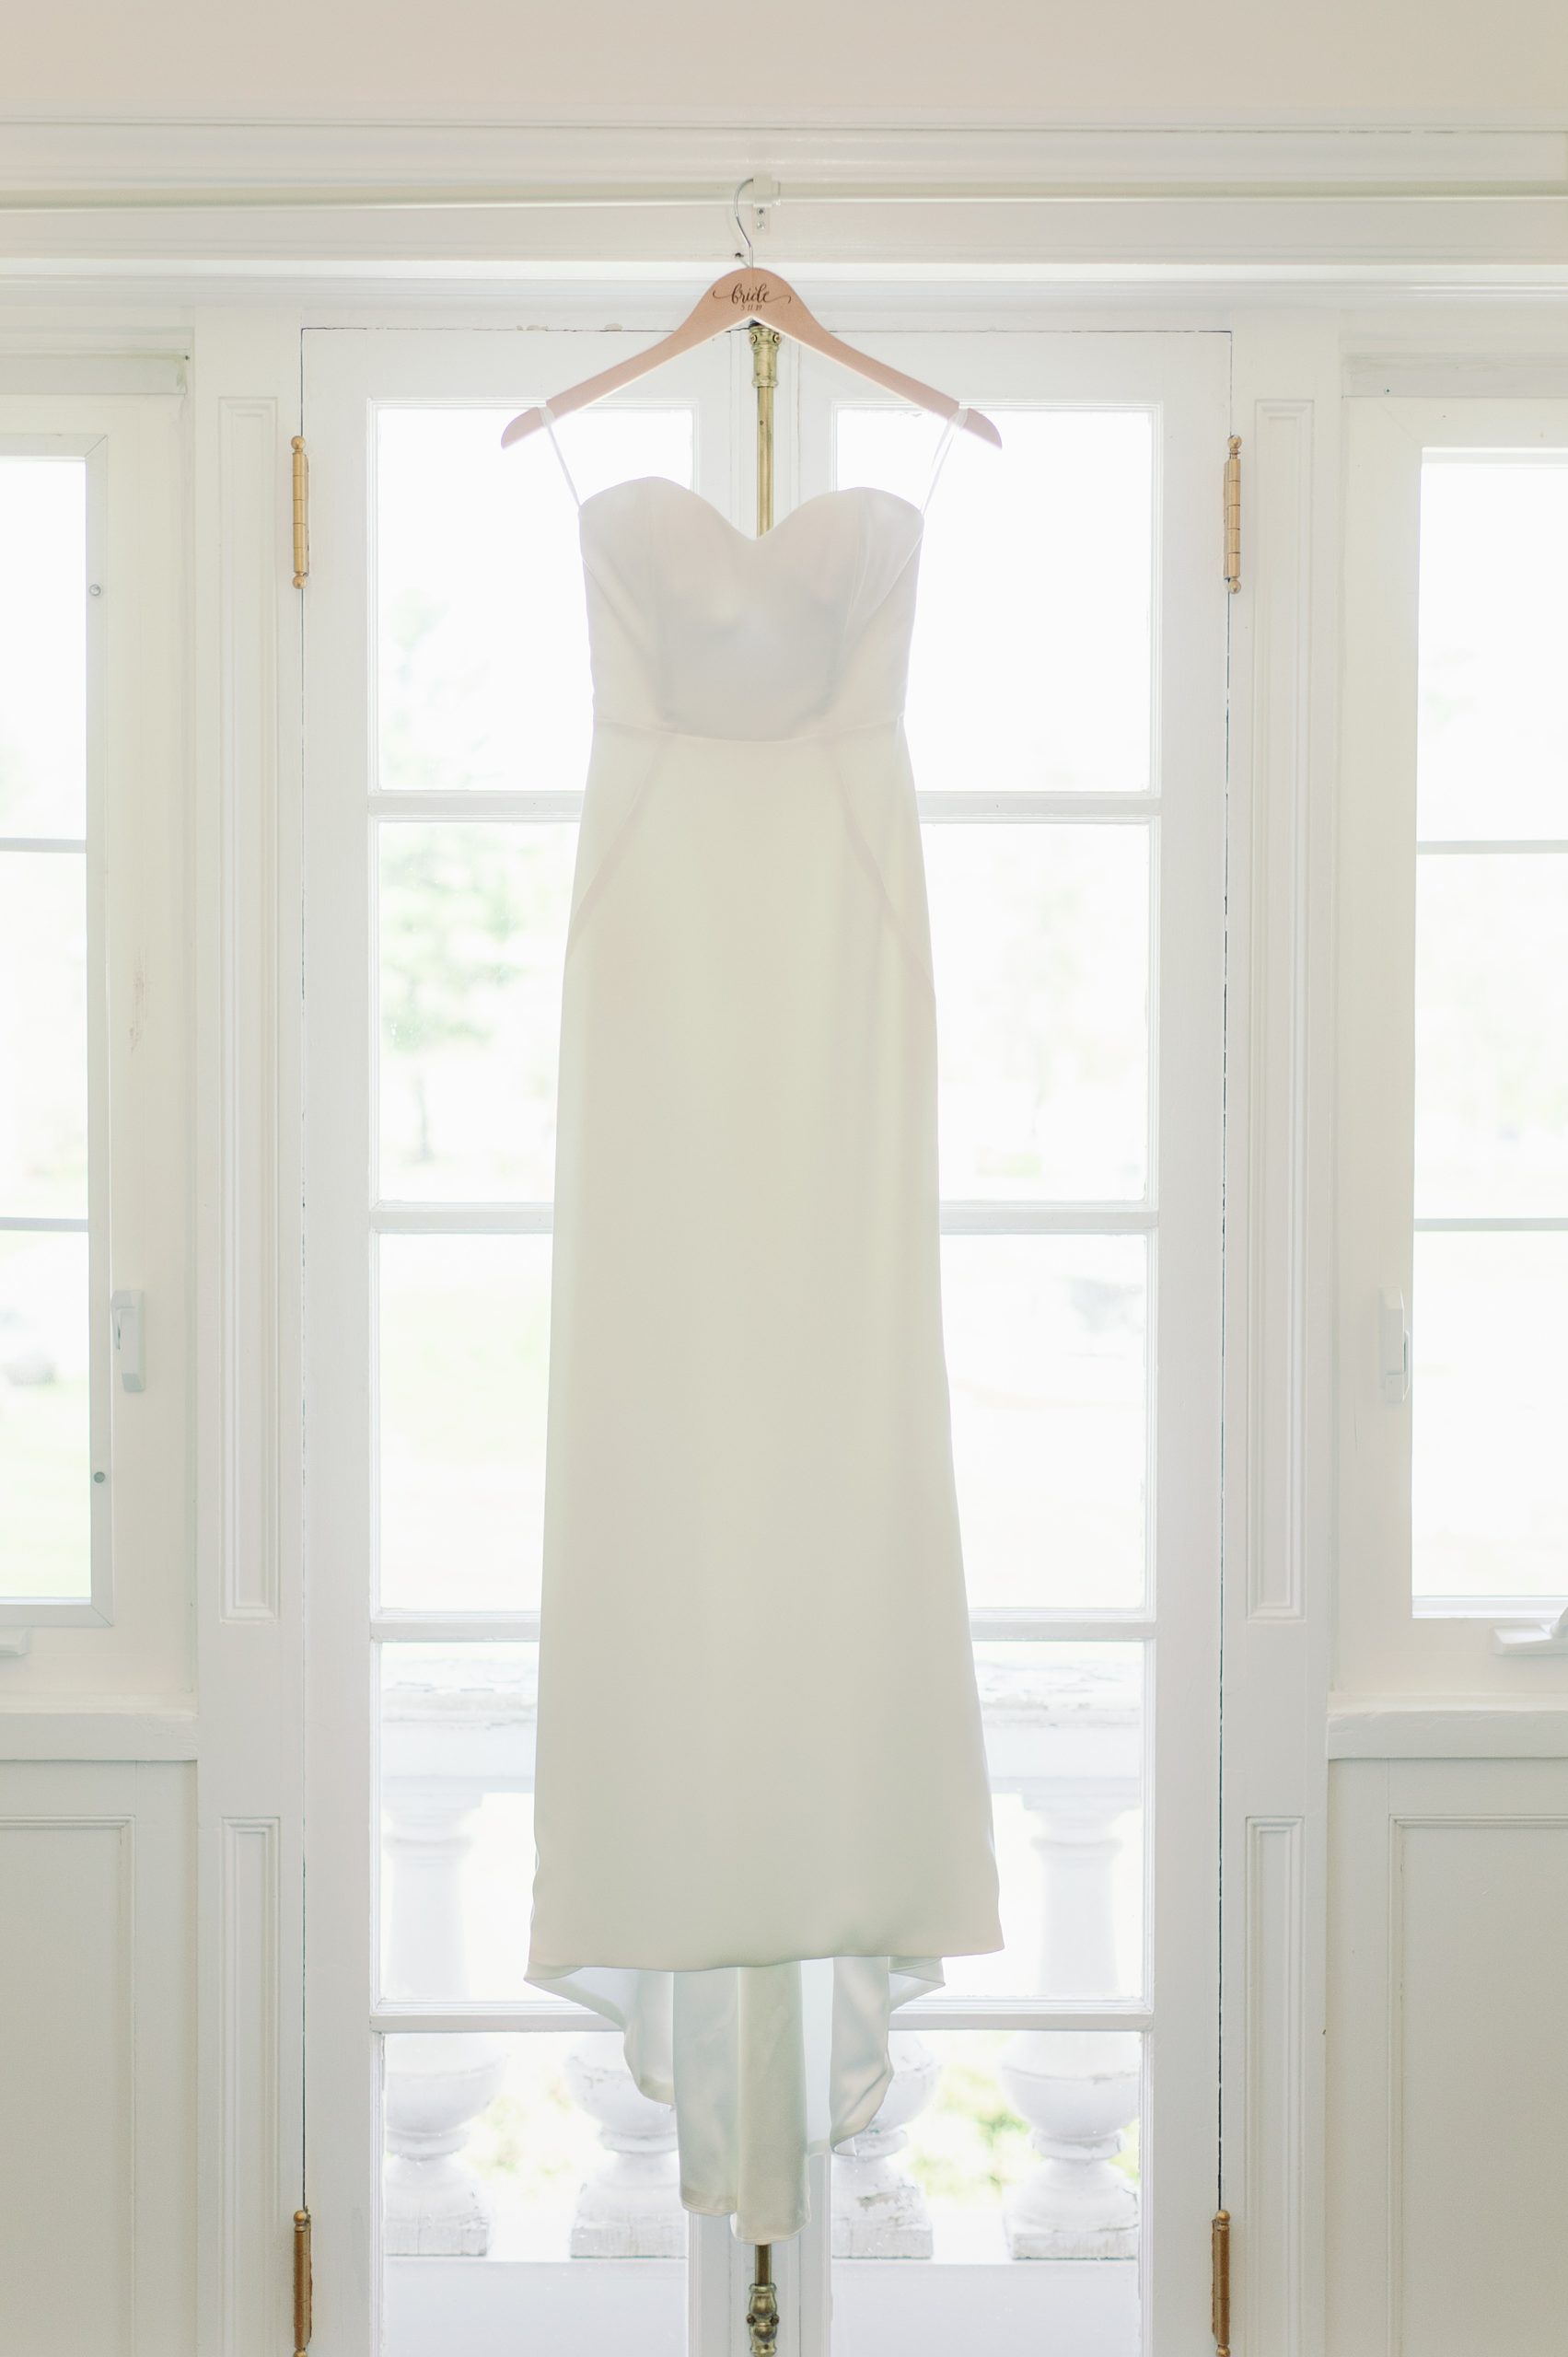 Wedding dress hung in window for estate wedding in Beverly MA North Shore Boston